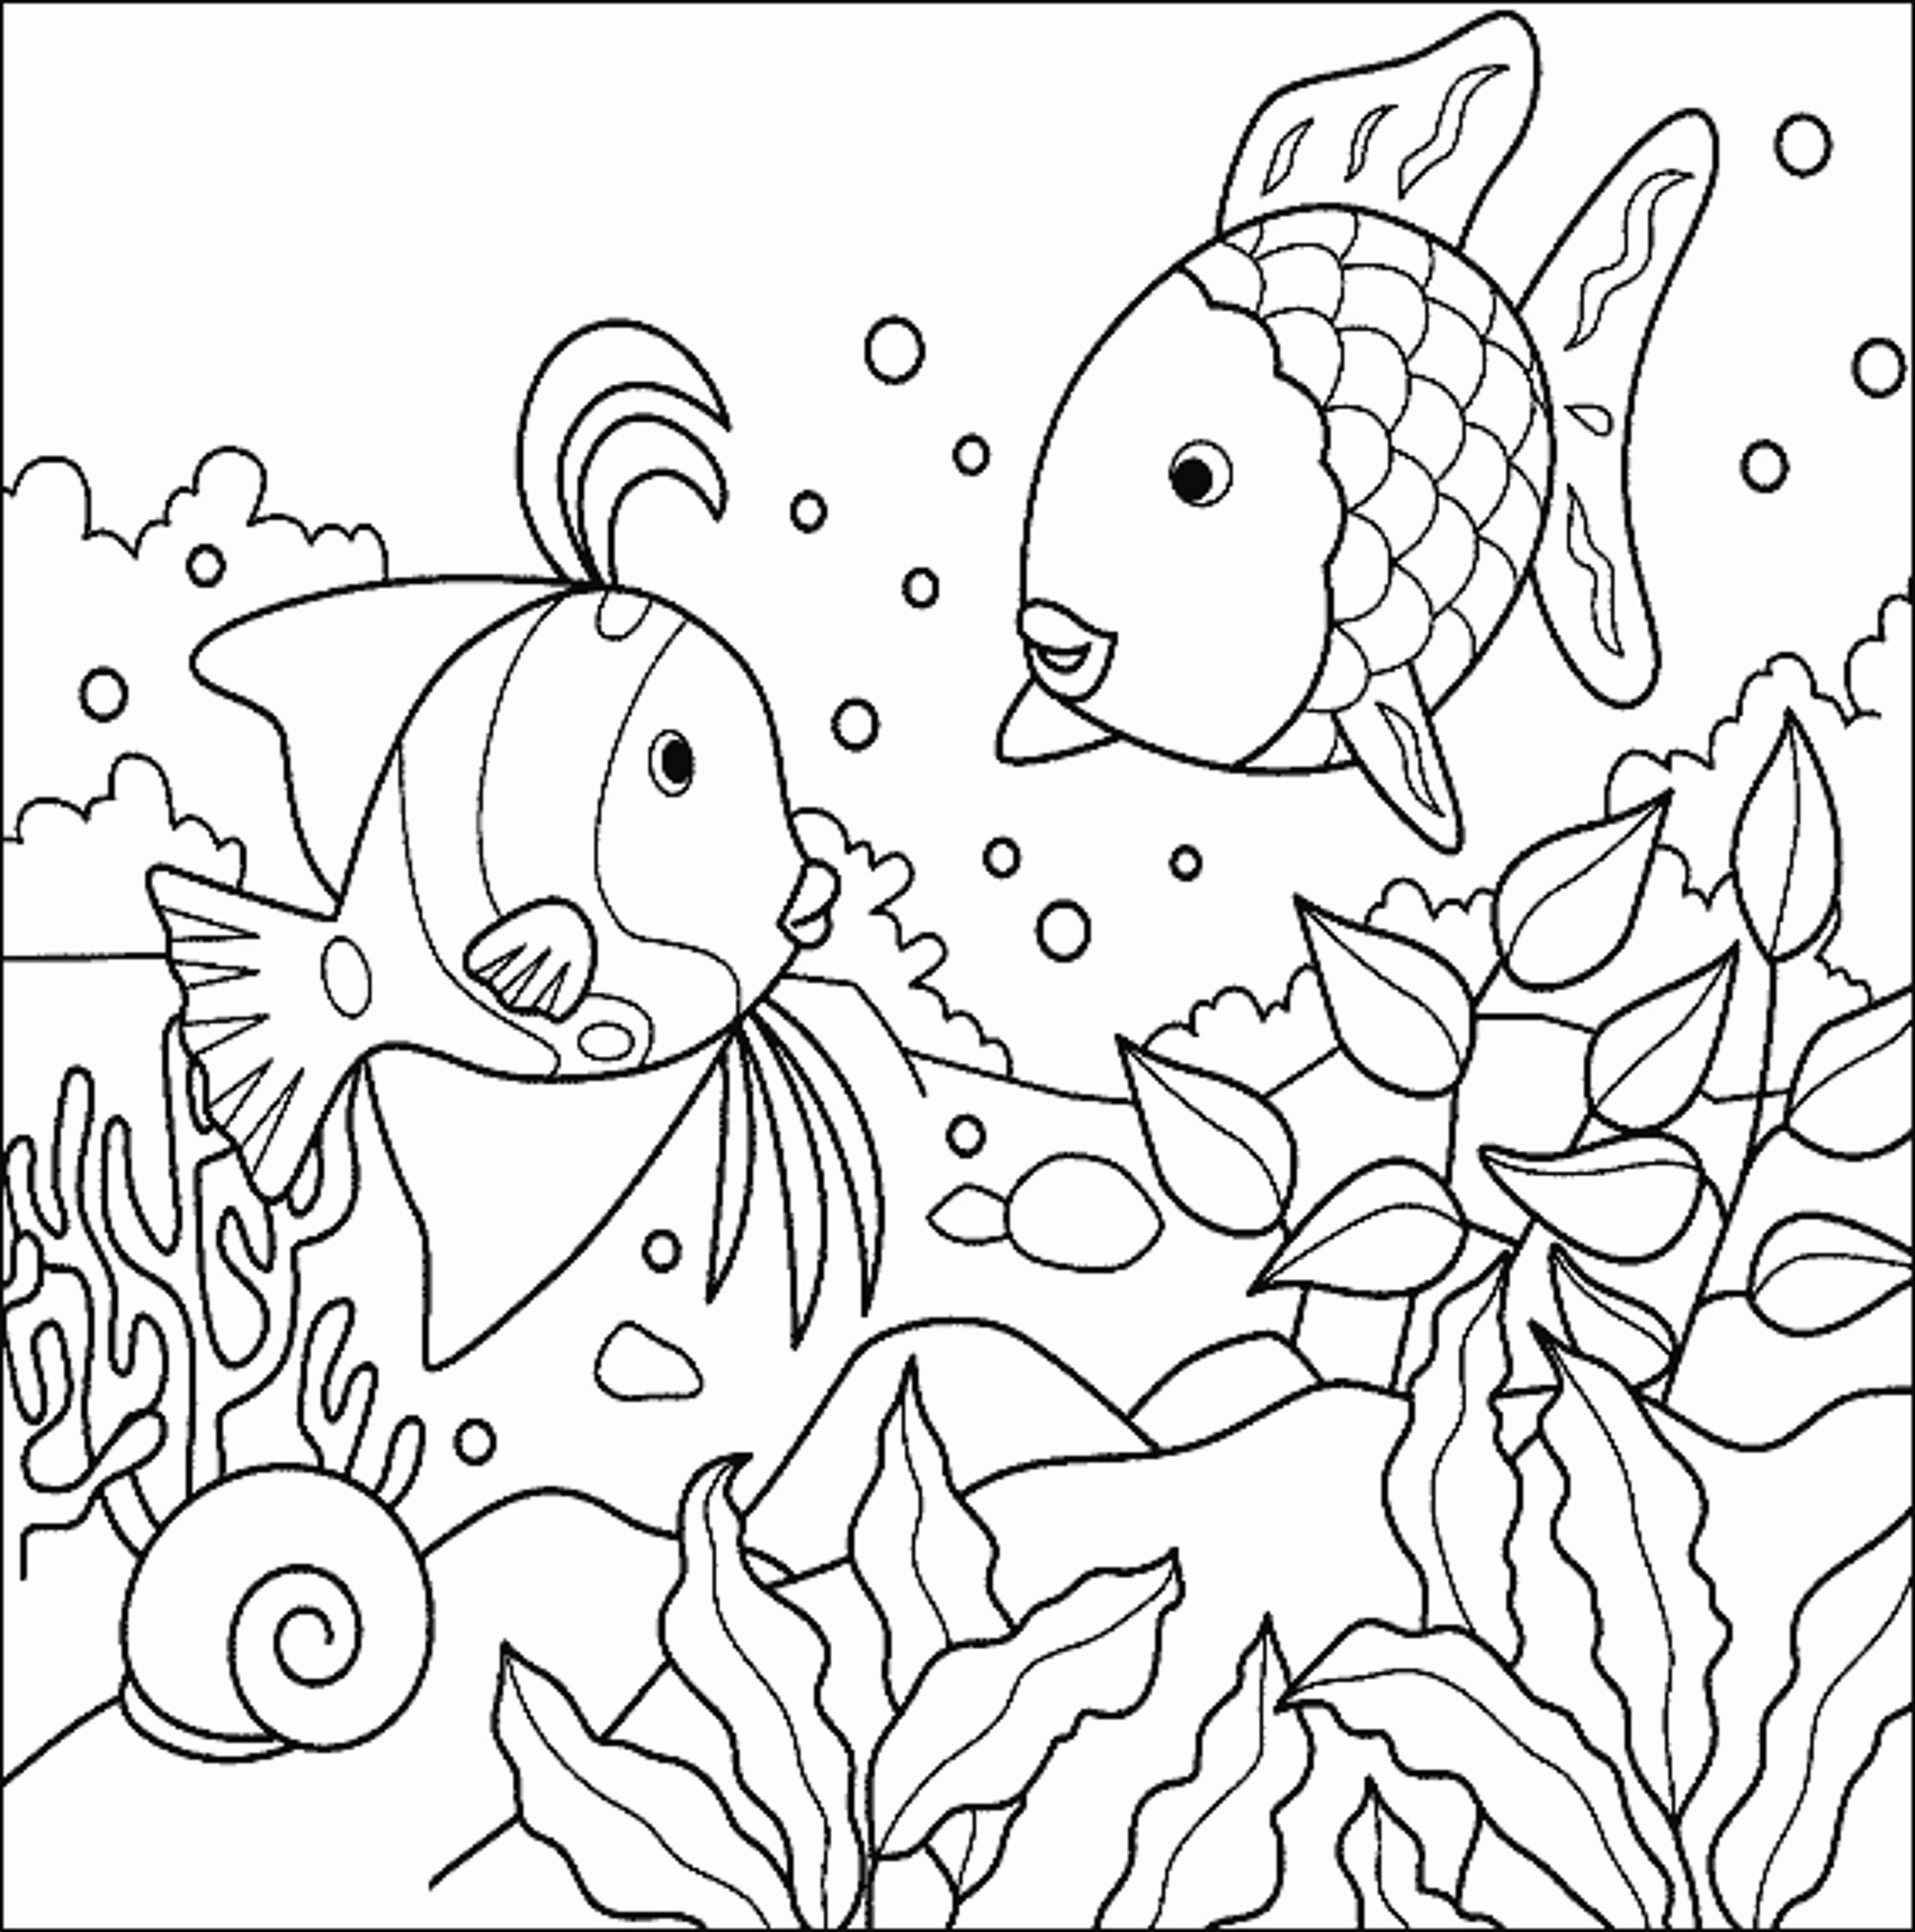 Print Download Cute And Educative Fish Coloring Pages